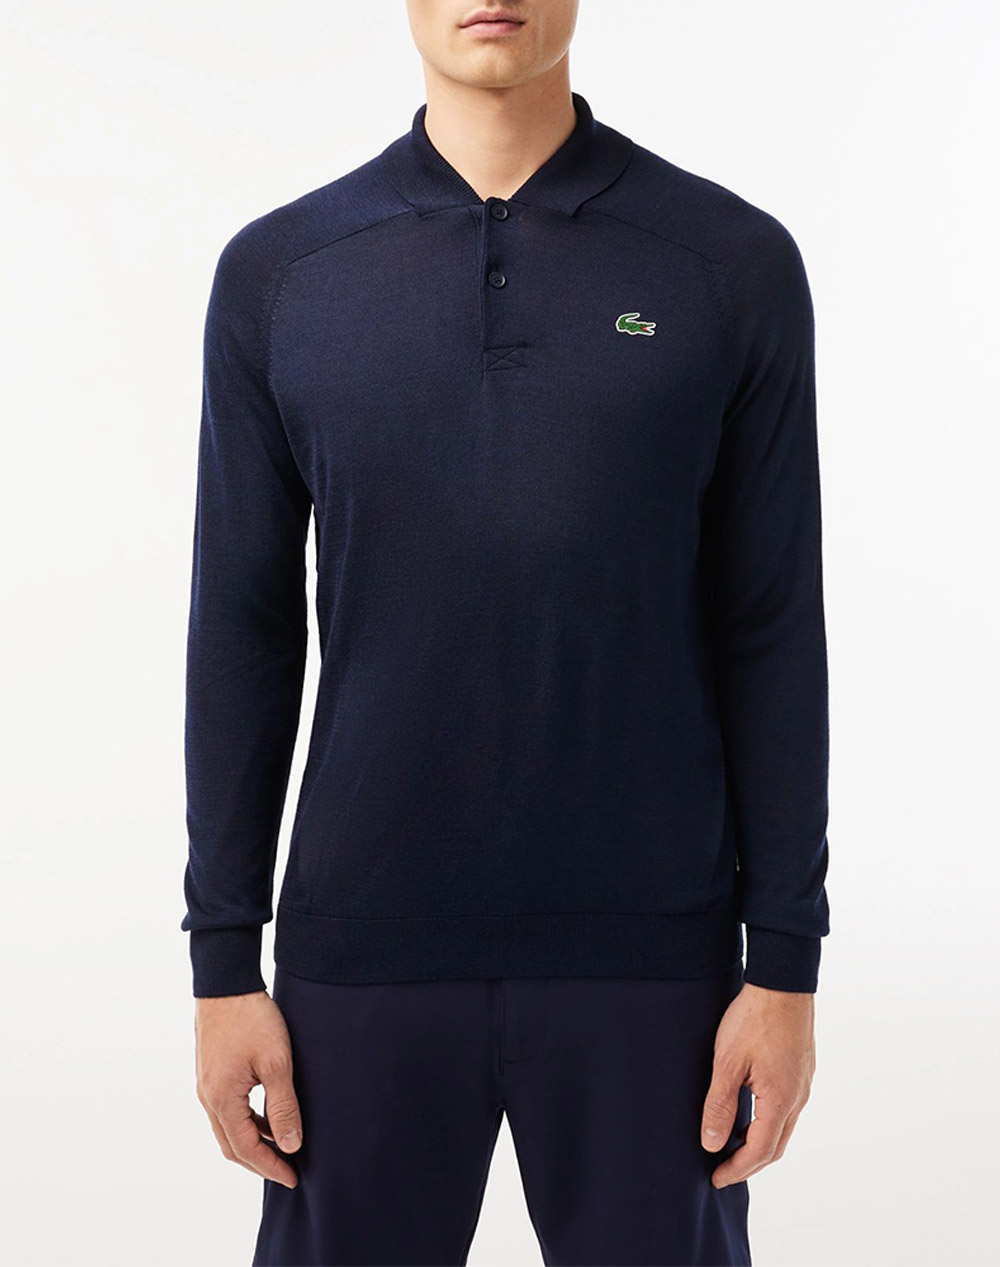 LACOSTE PULOVER SWEATER